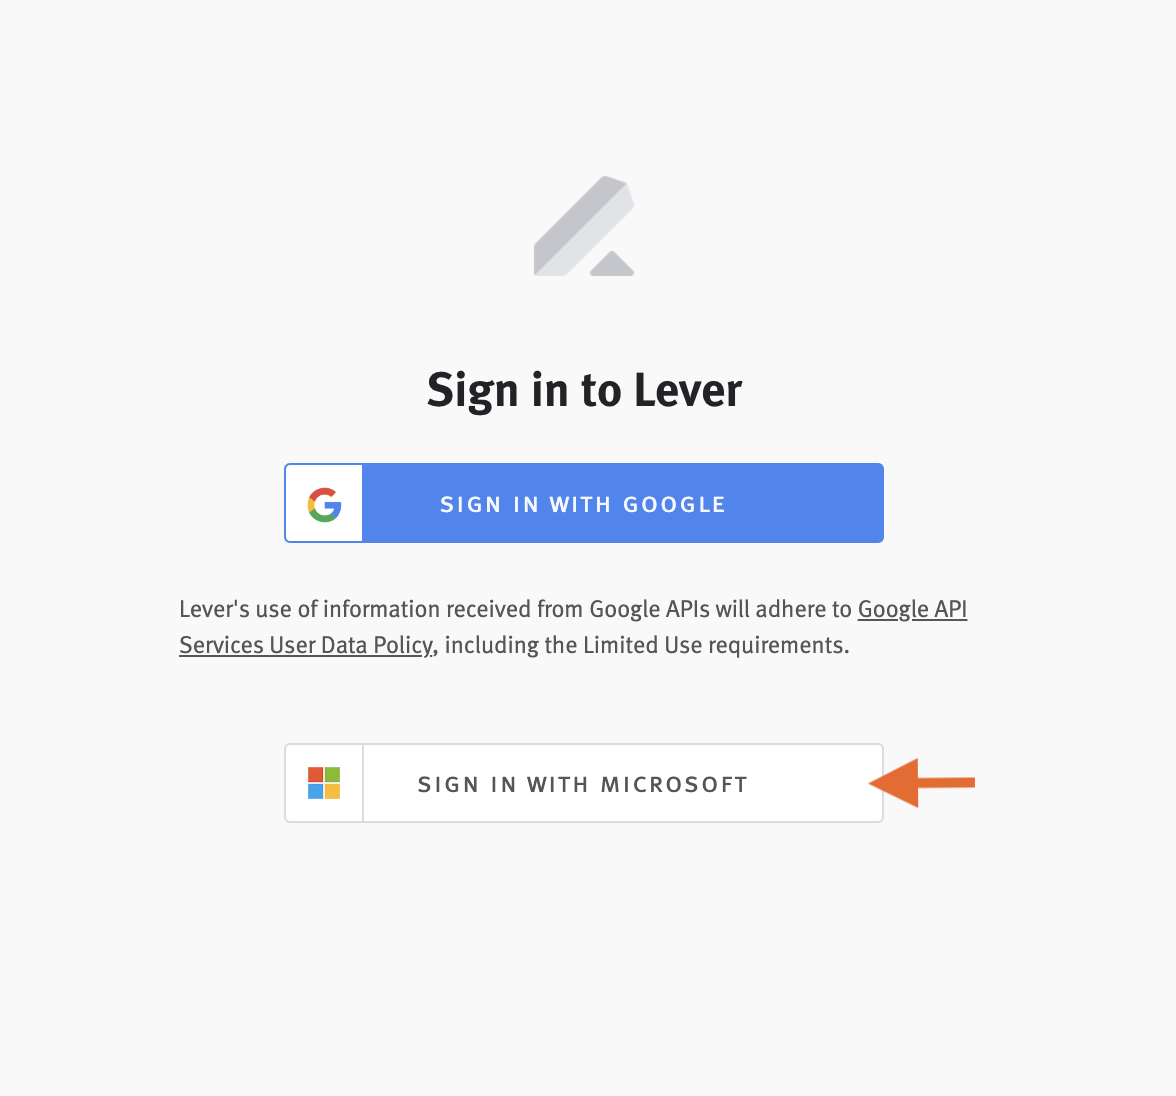 Lever login page with arrow pointing to Sign in with Microsoft button.